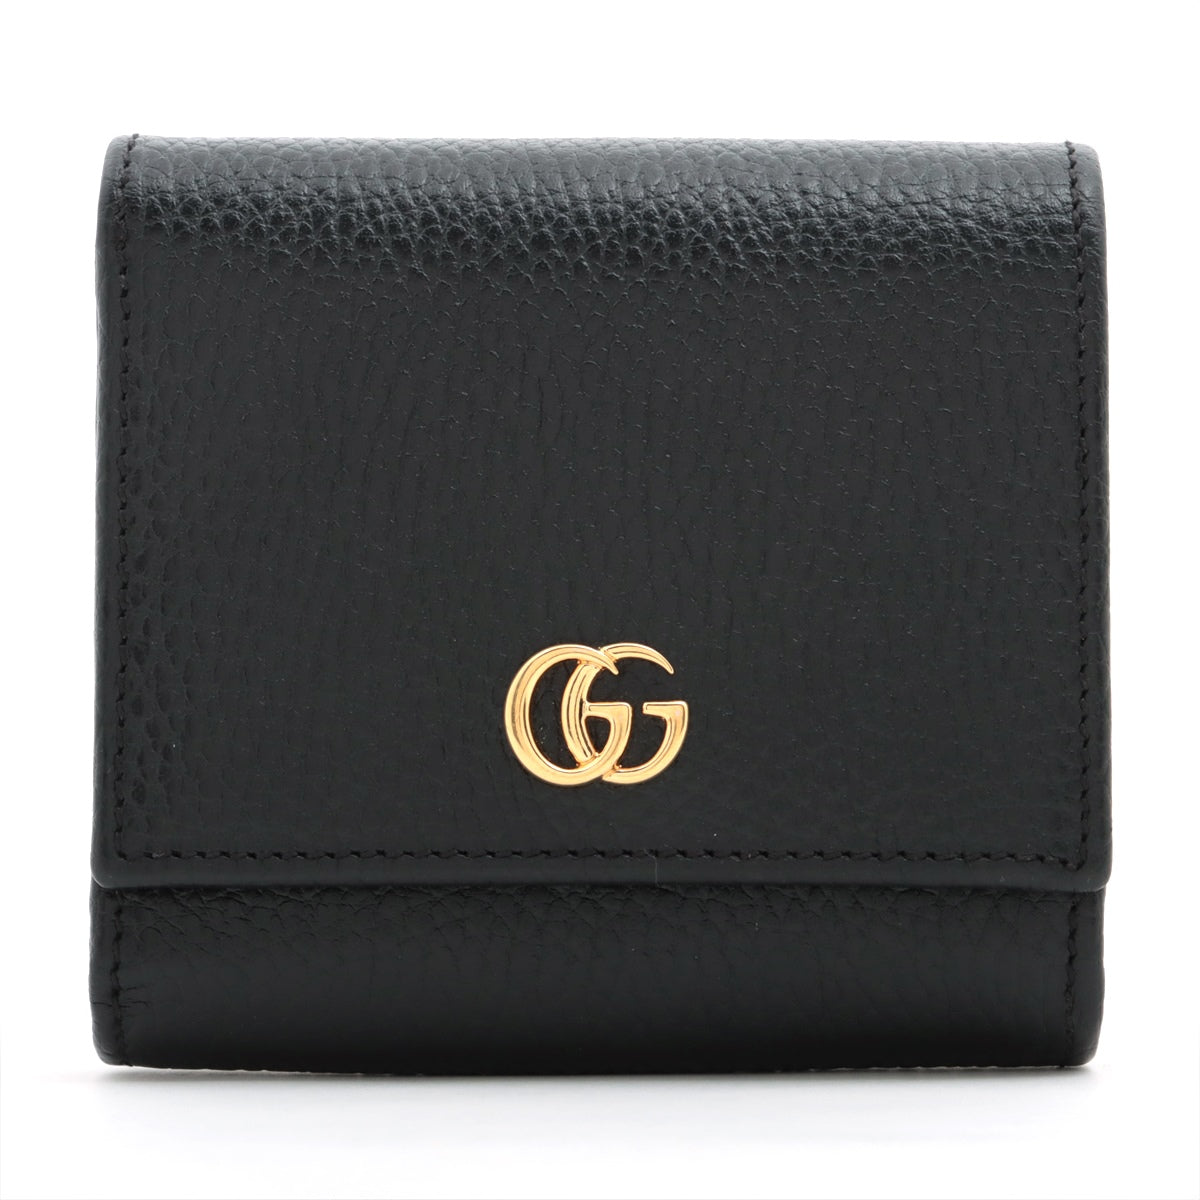 Gucci GG Marmont 598587 Leather Wallet Black